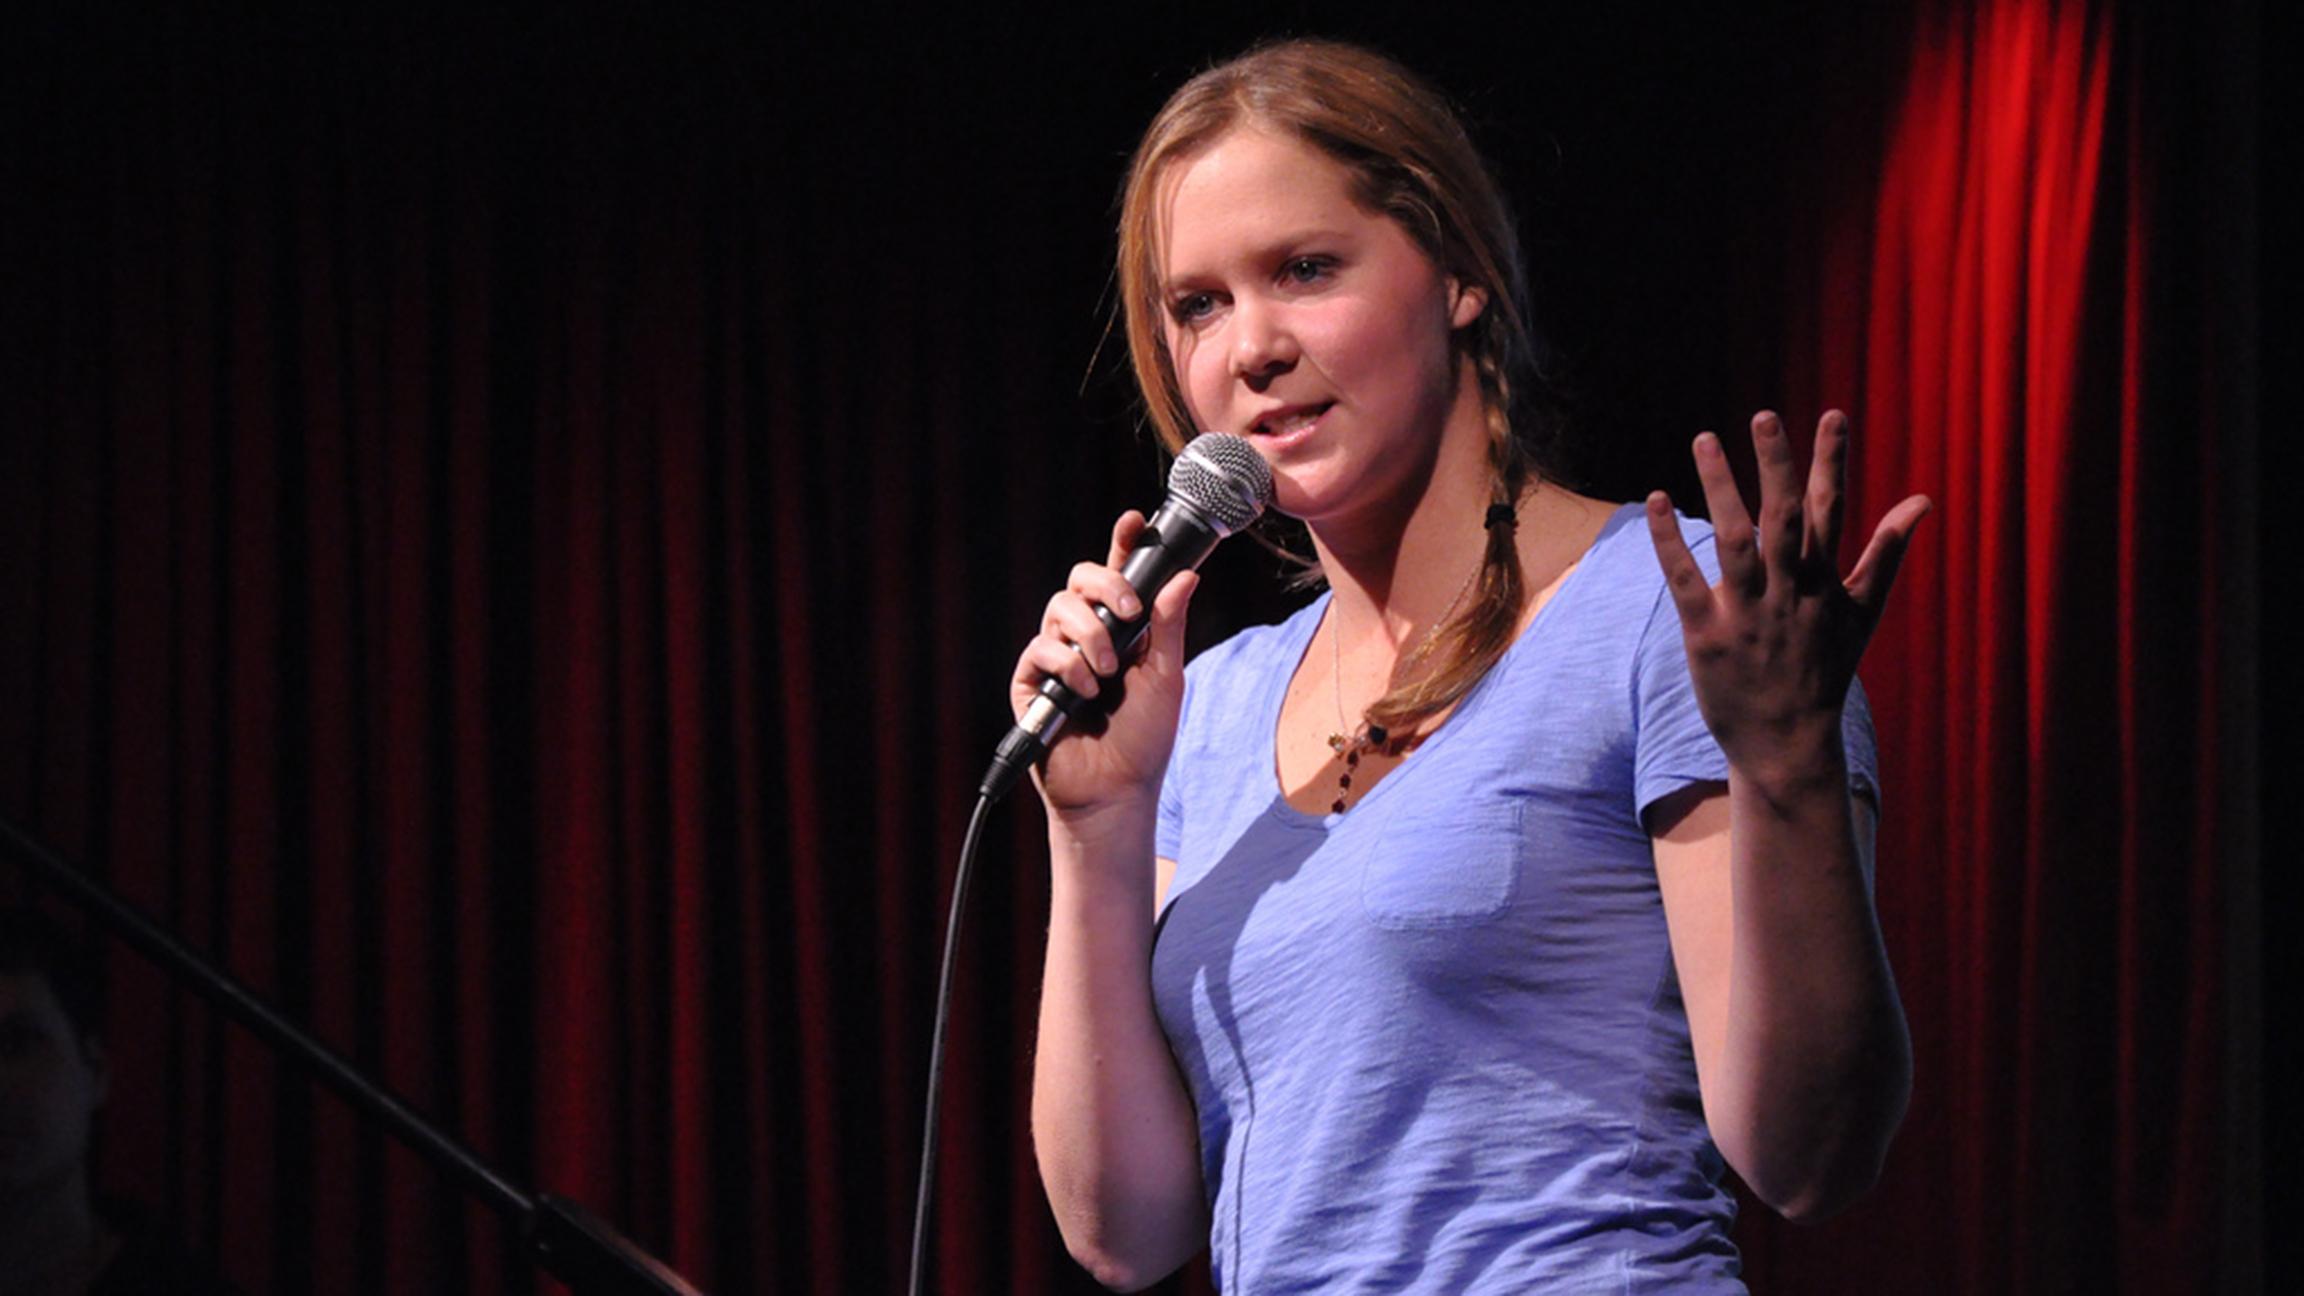 Before she was a “Trainwreck”: Amy Schumer performs in 2010 at Comedy Below Canal. (92YTribeca / Flickr)